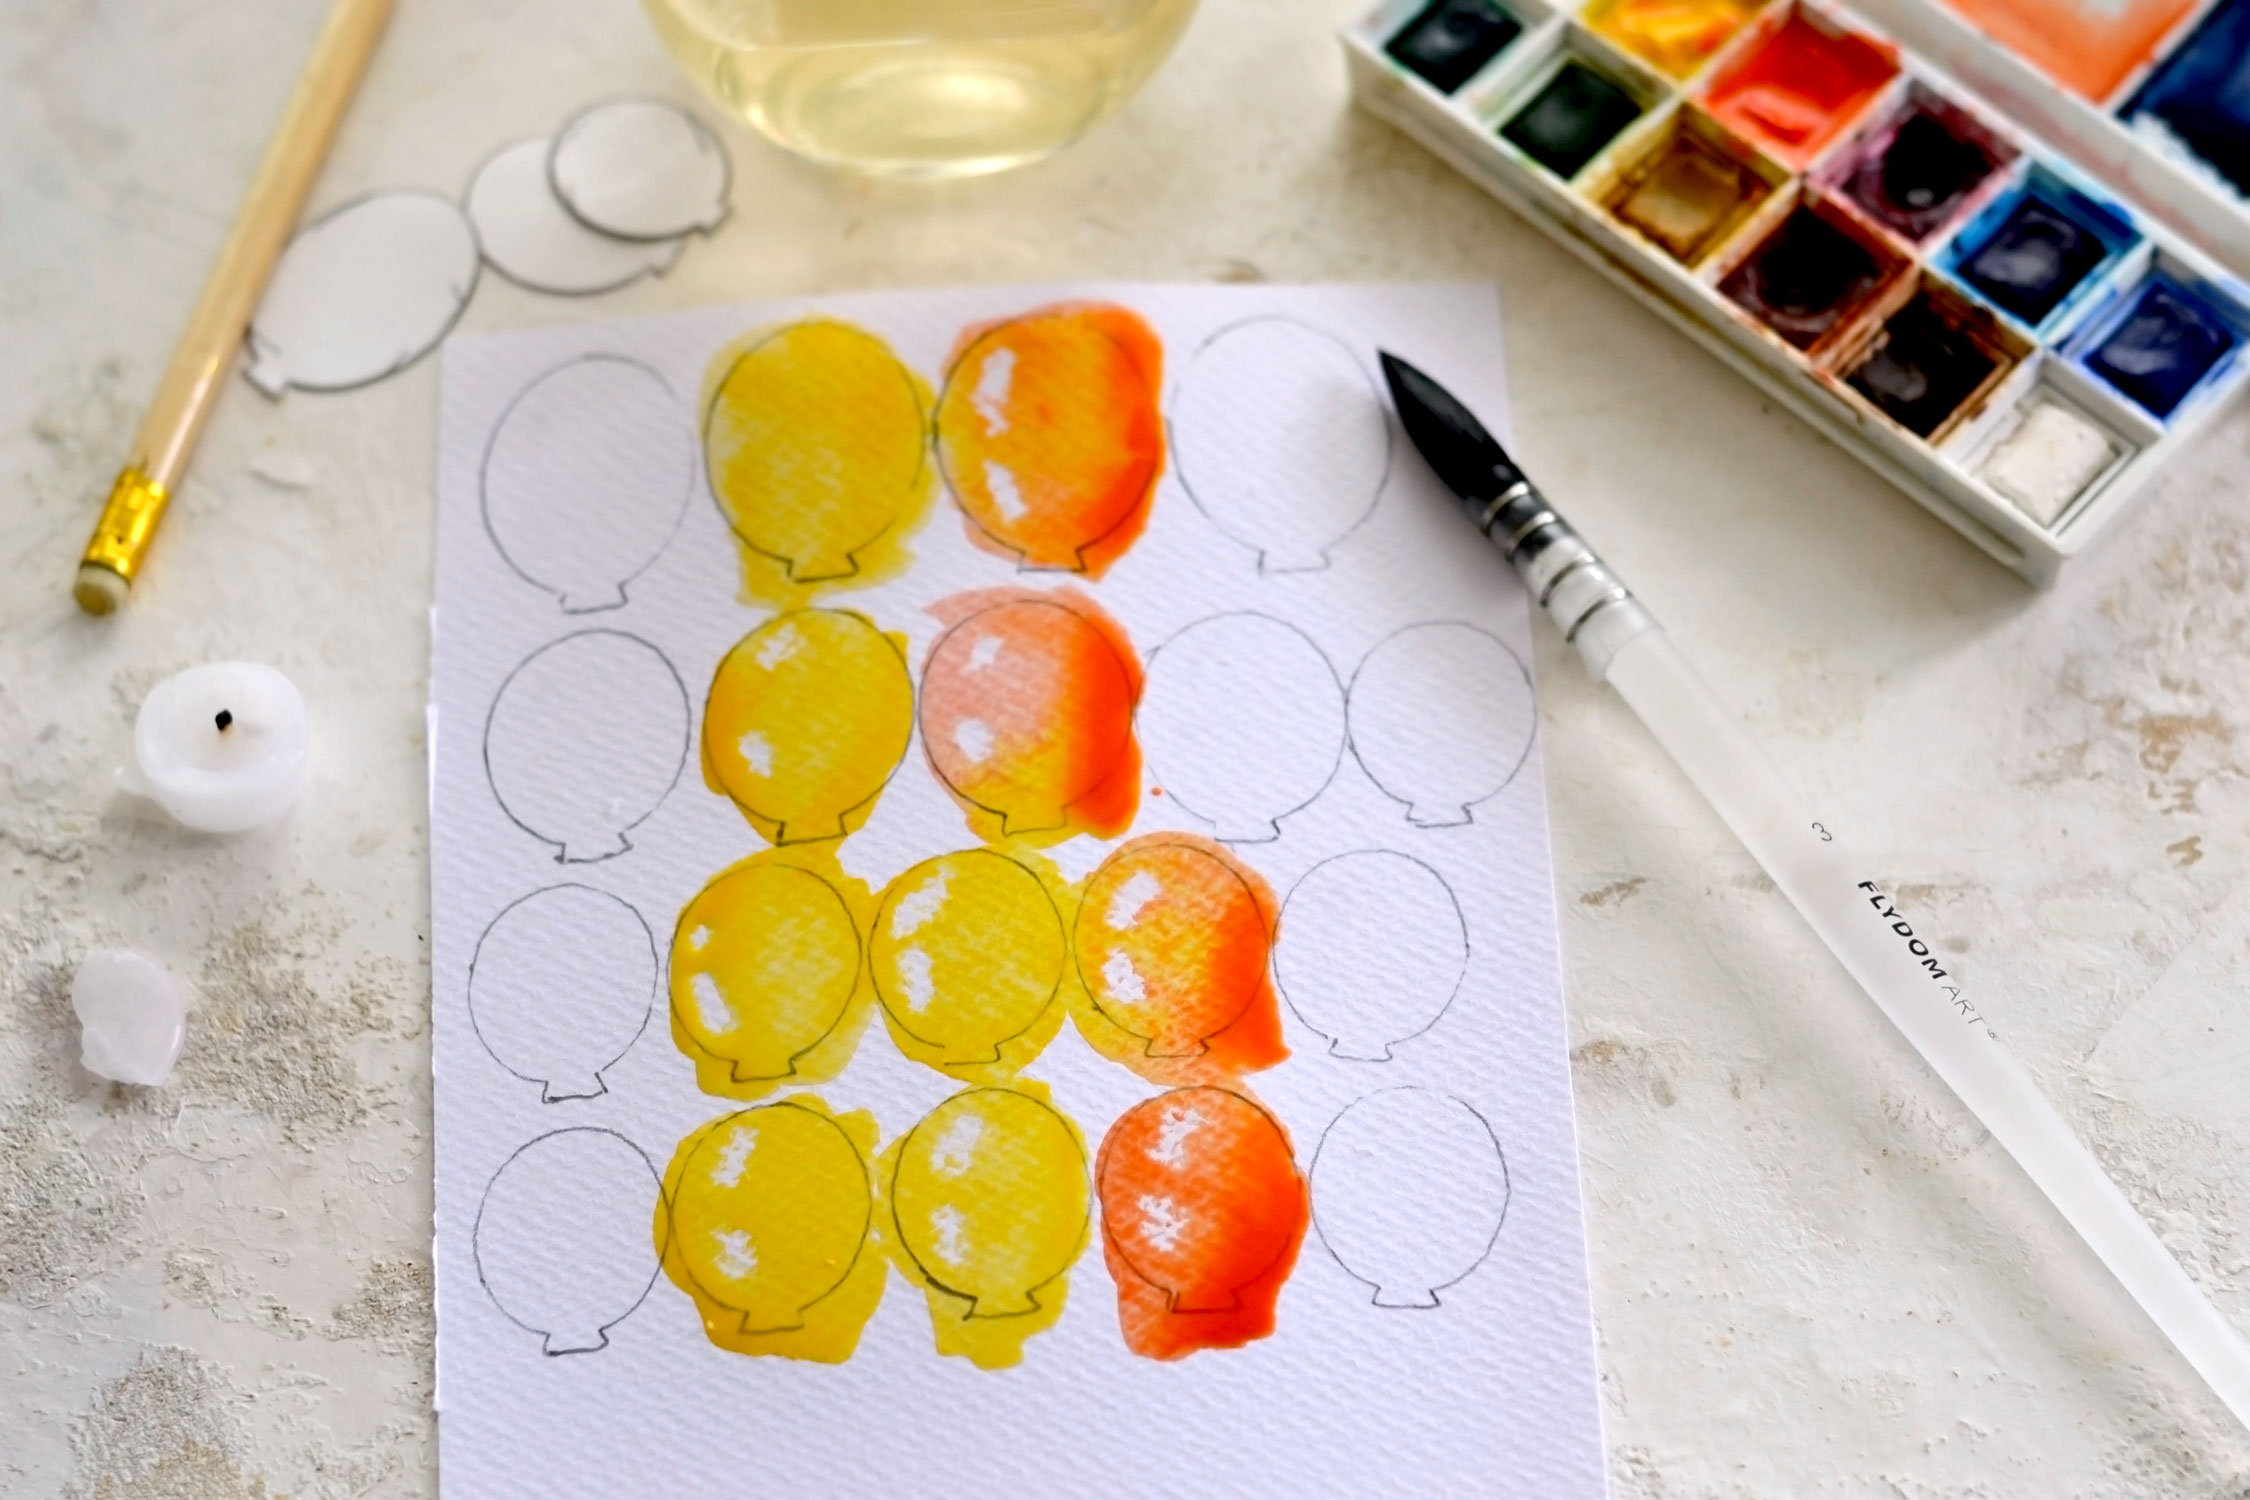 painting the balloons with watercolors